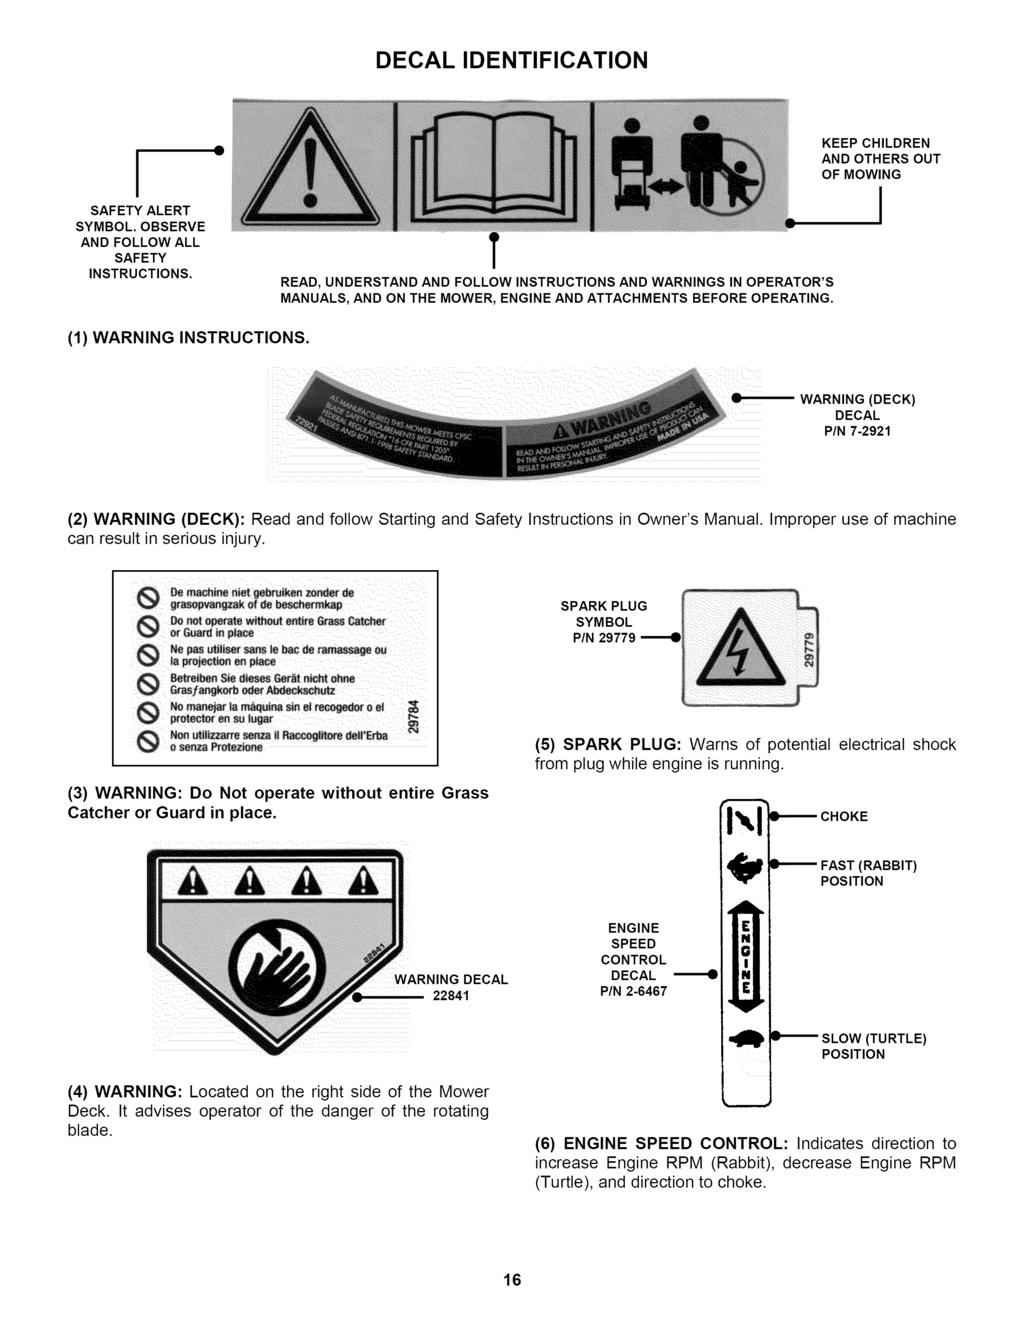 DECAL IDENTIFICATION I SAFETY ALERT SYMBOL. OBSERVE AND FOLLOW ALL SAFETY INSTRUCTIONS.